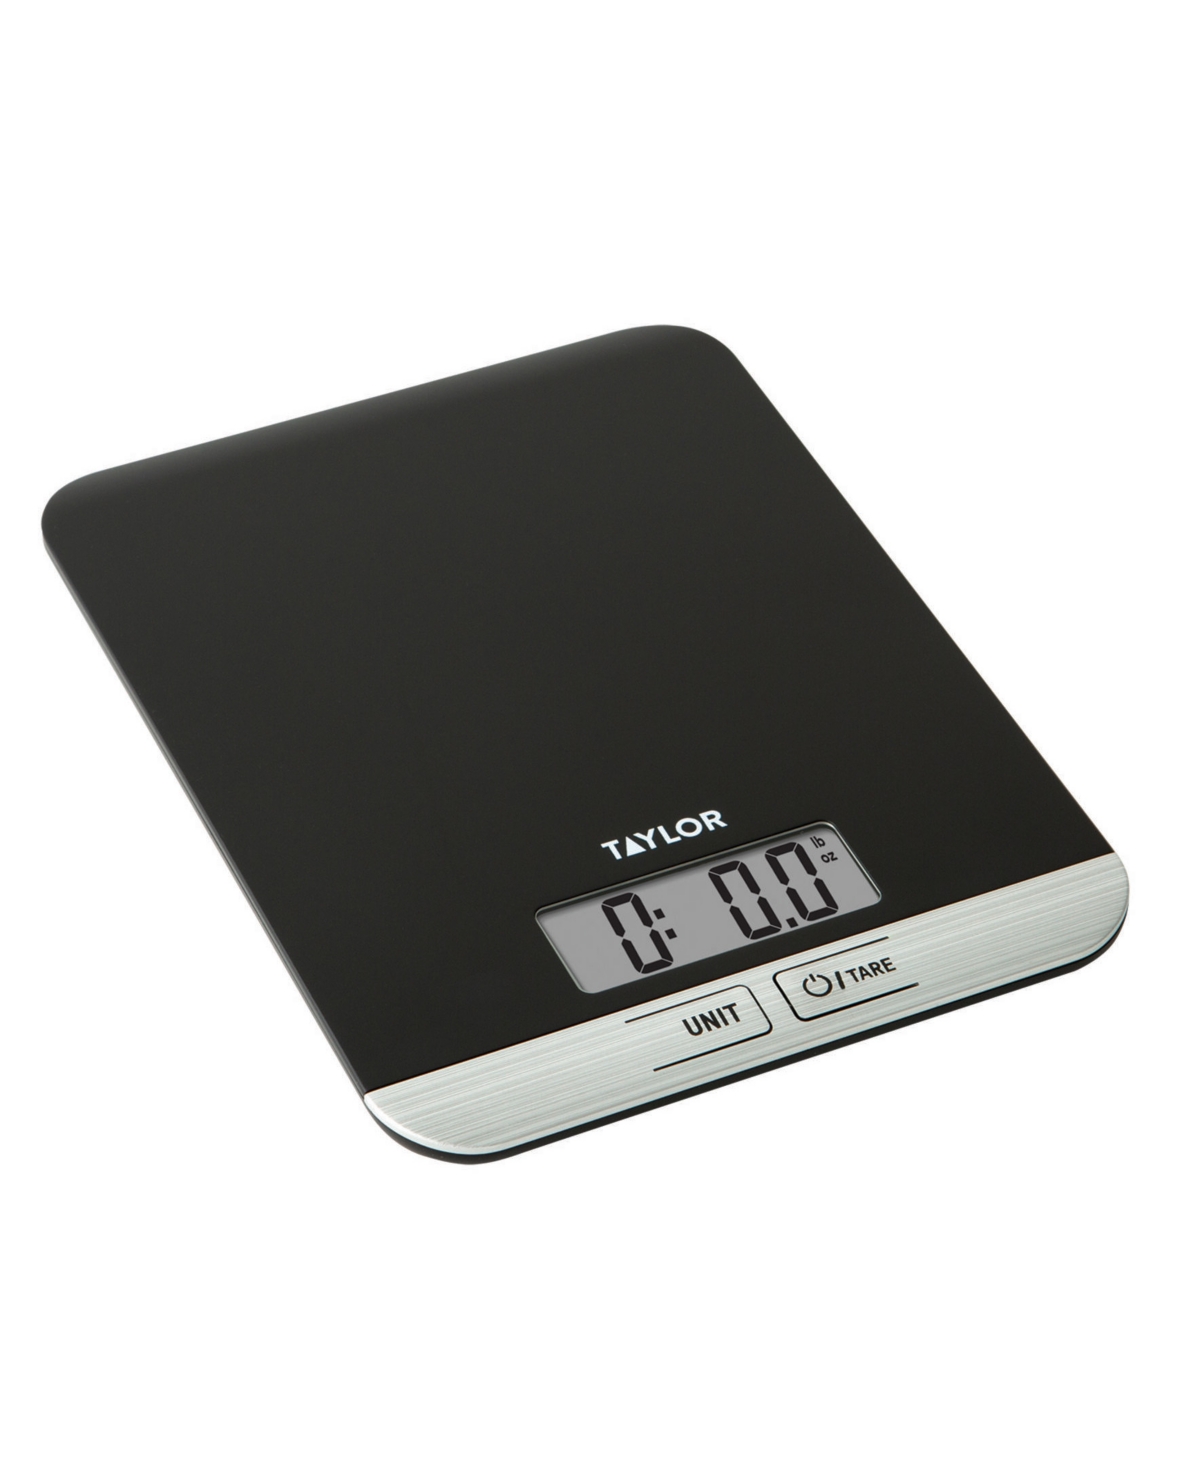 Taylor 11 Lbs Value Digital Kitchen Scale In Black